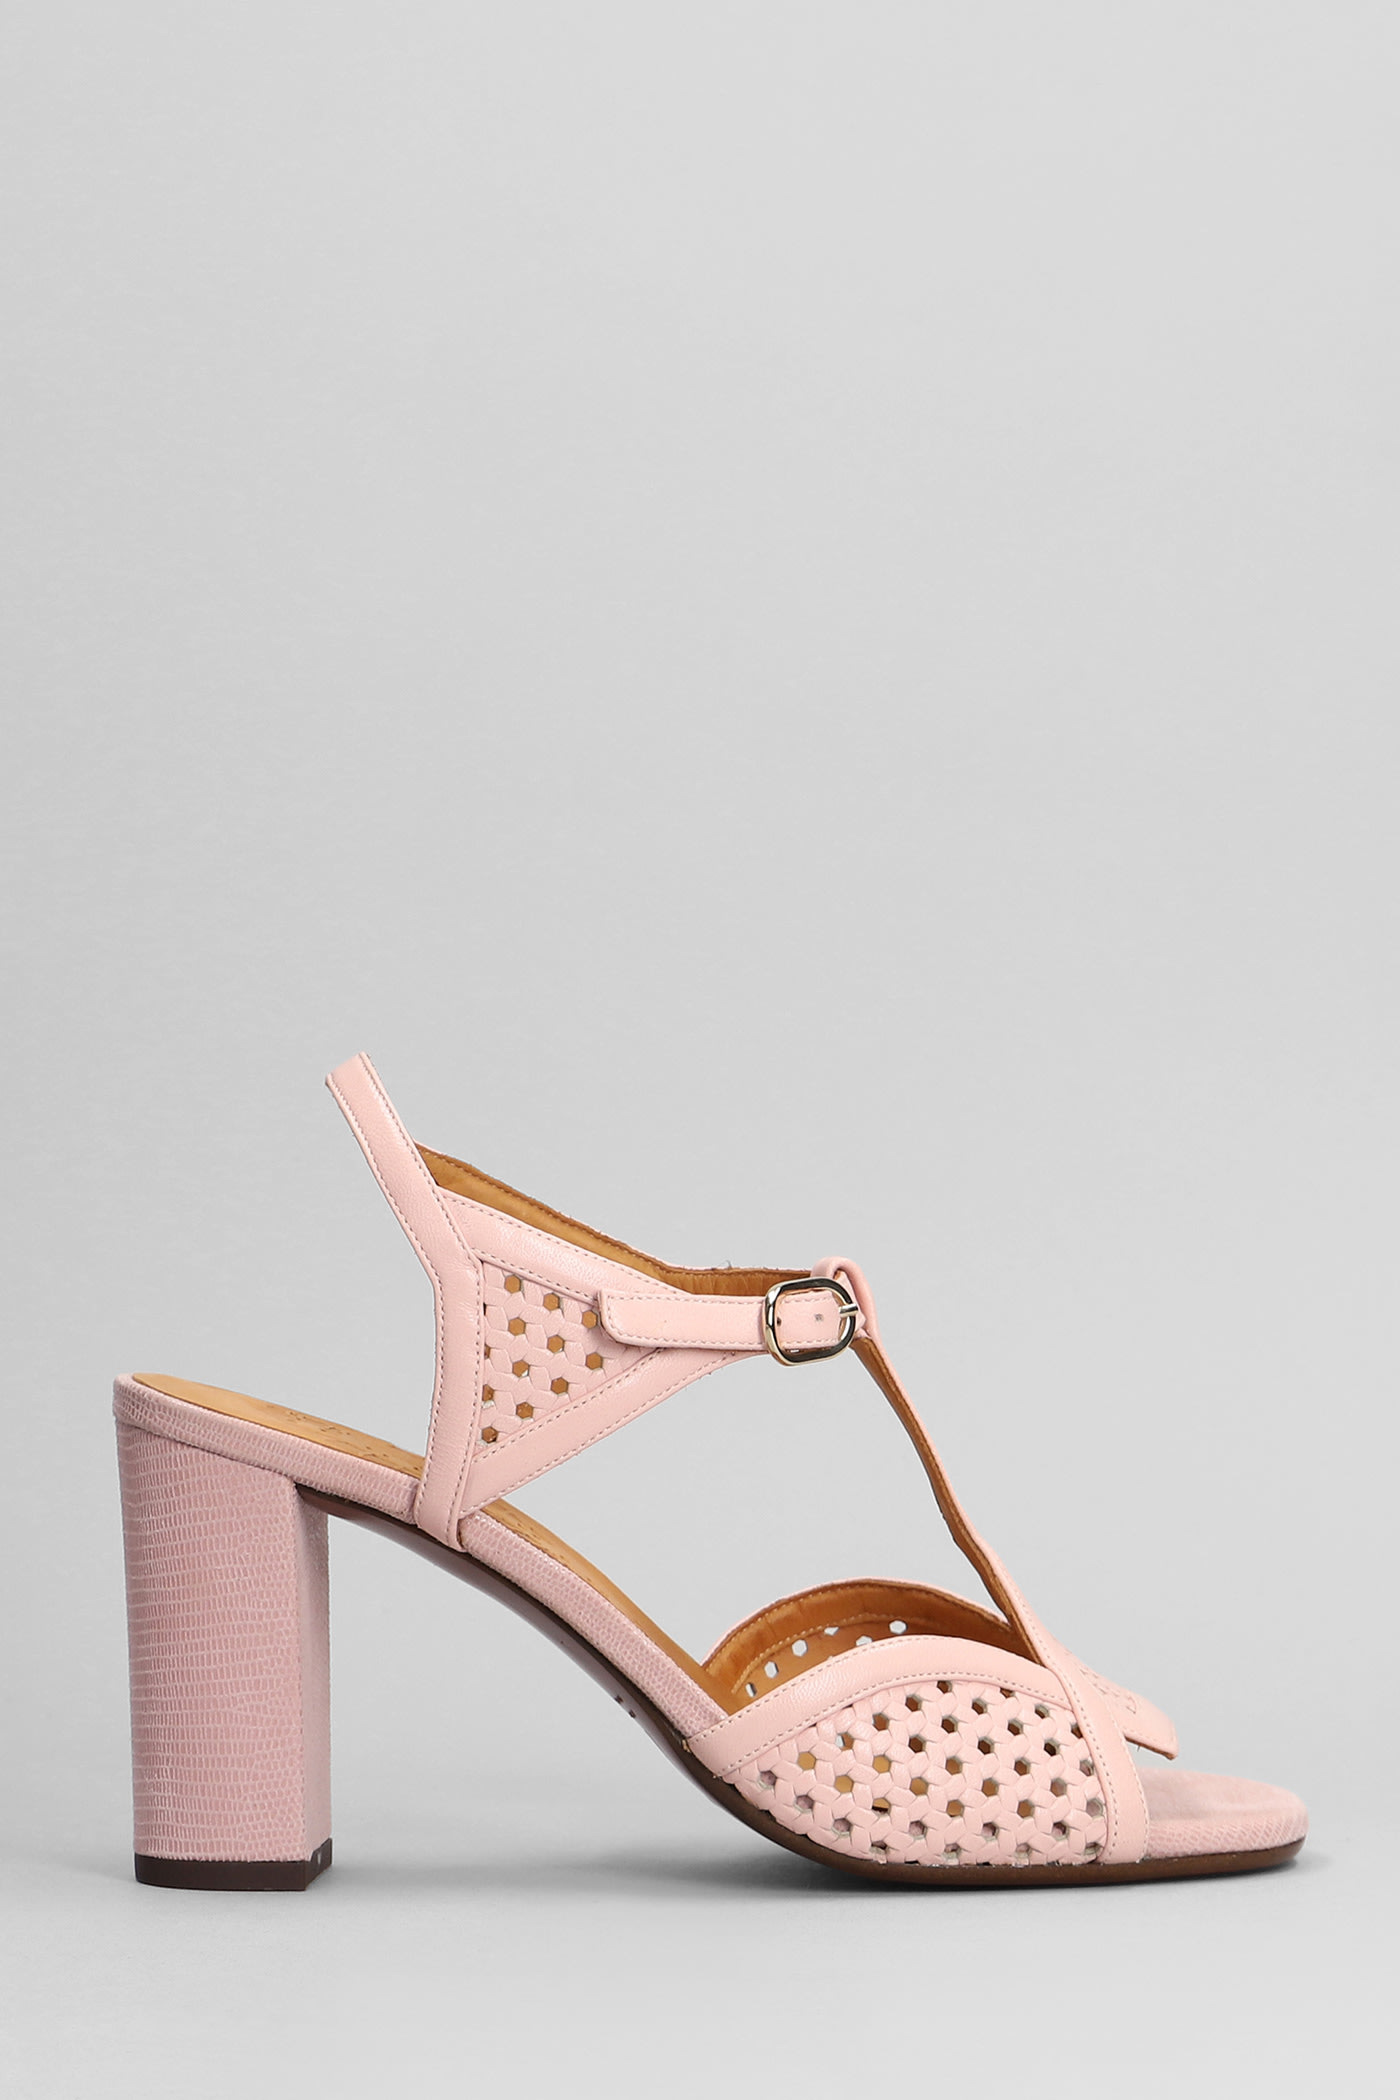 CHIE MIHARA BESSY SANDALS IN ROSE-PINK LEATHER